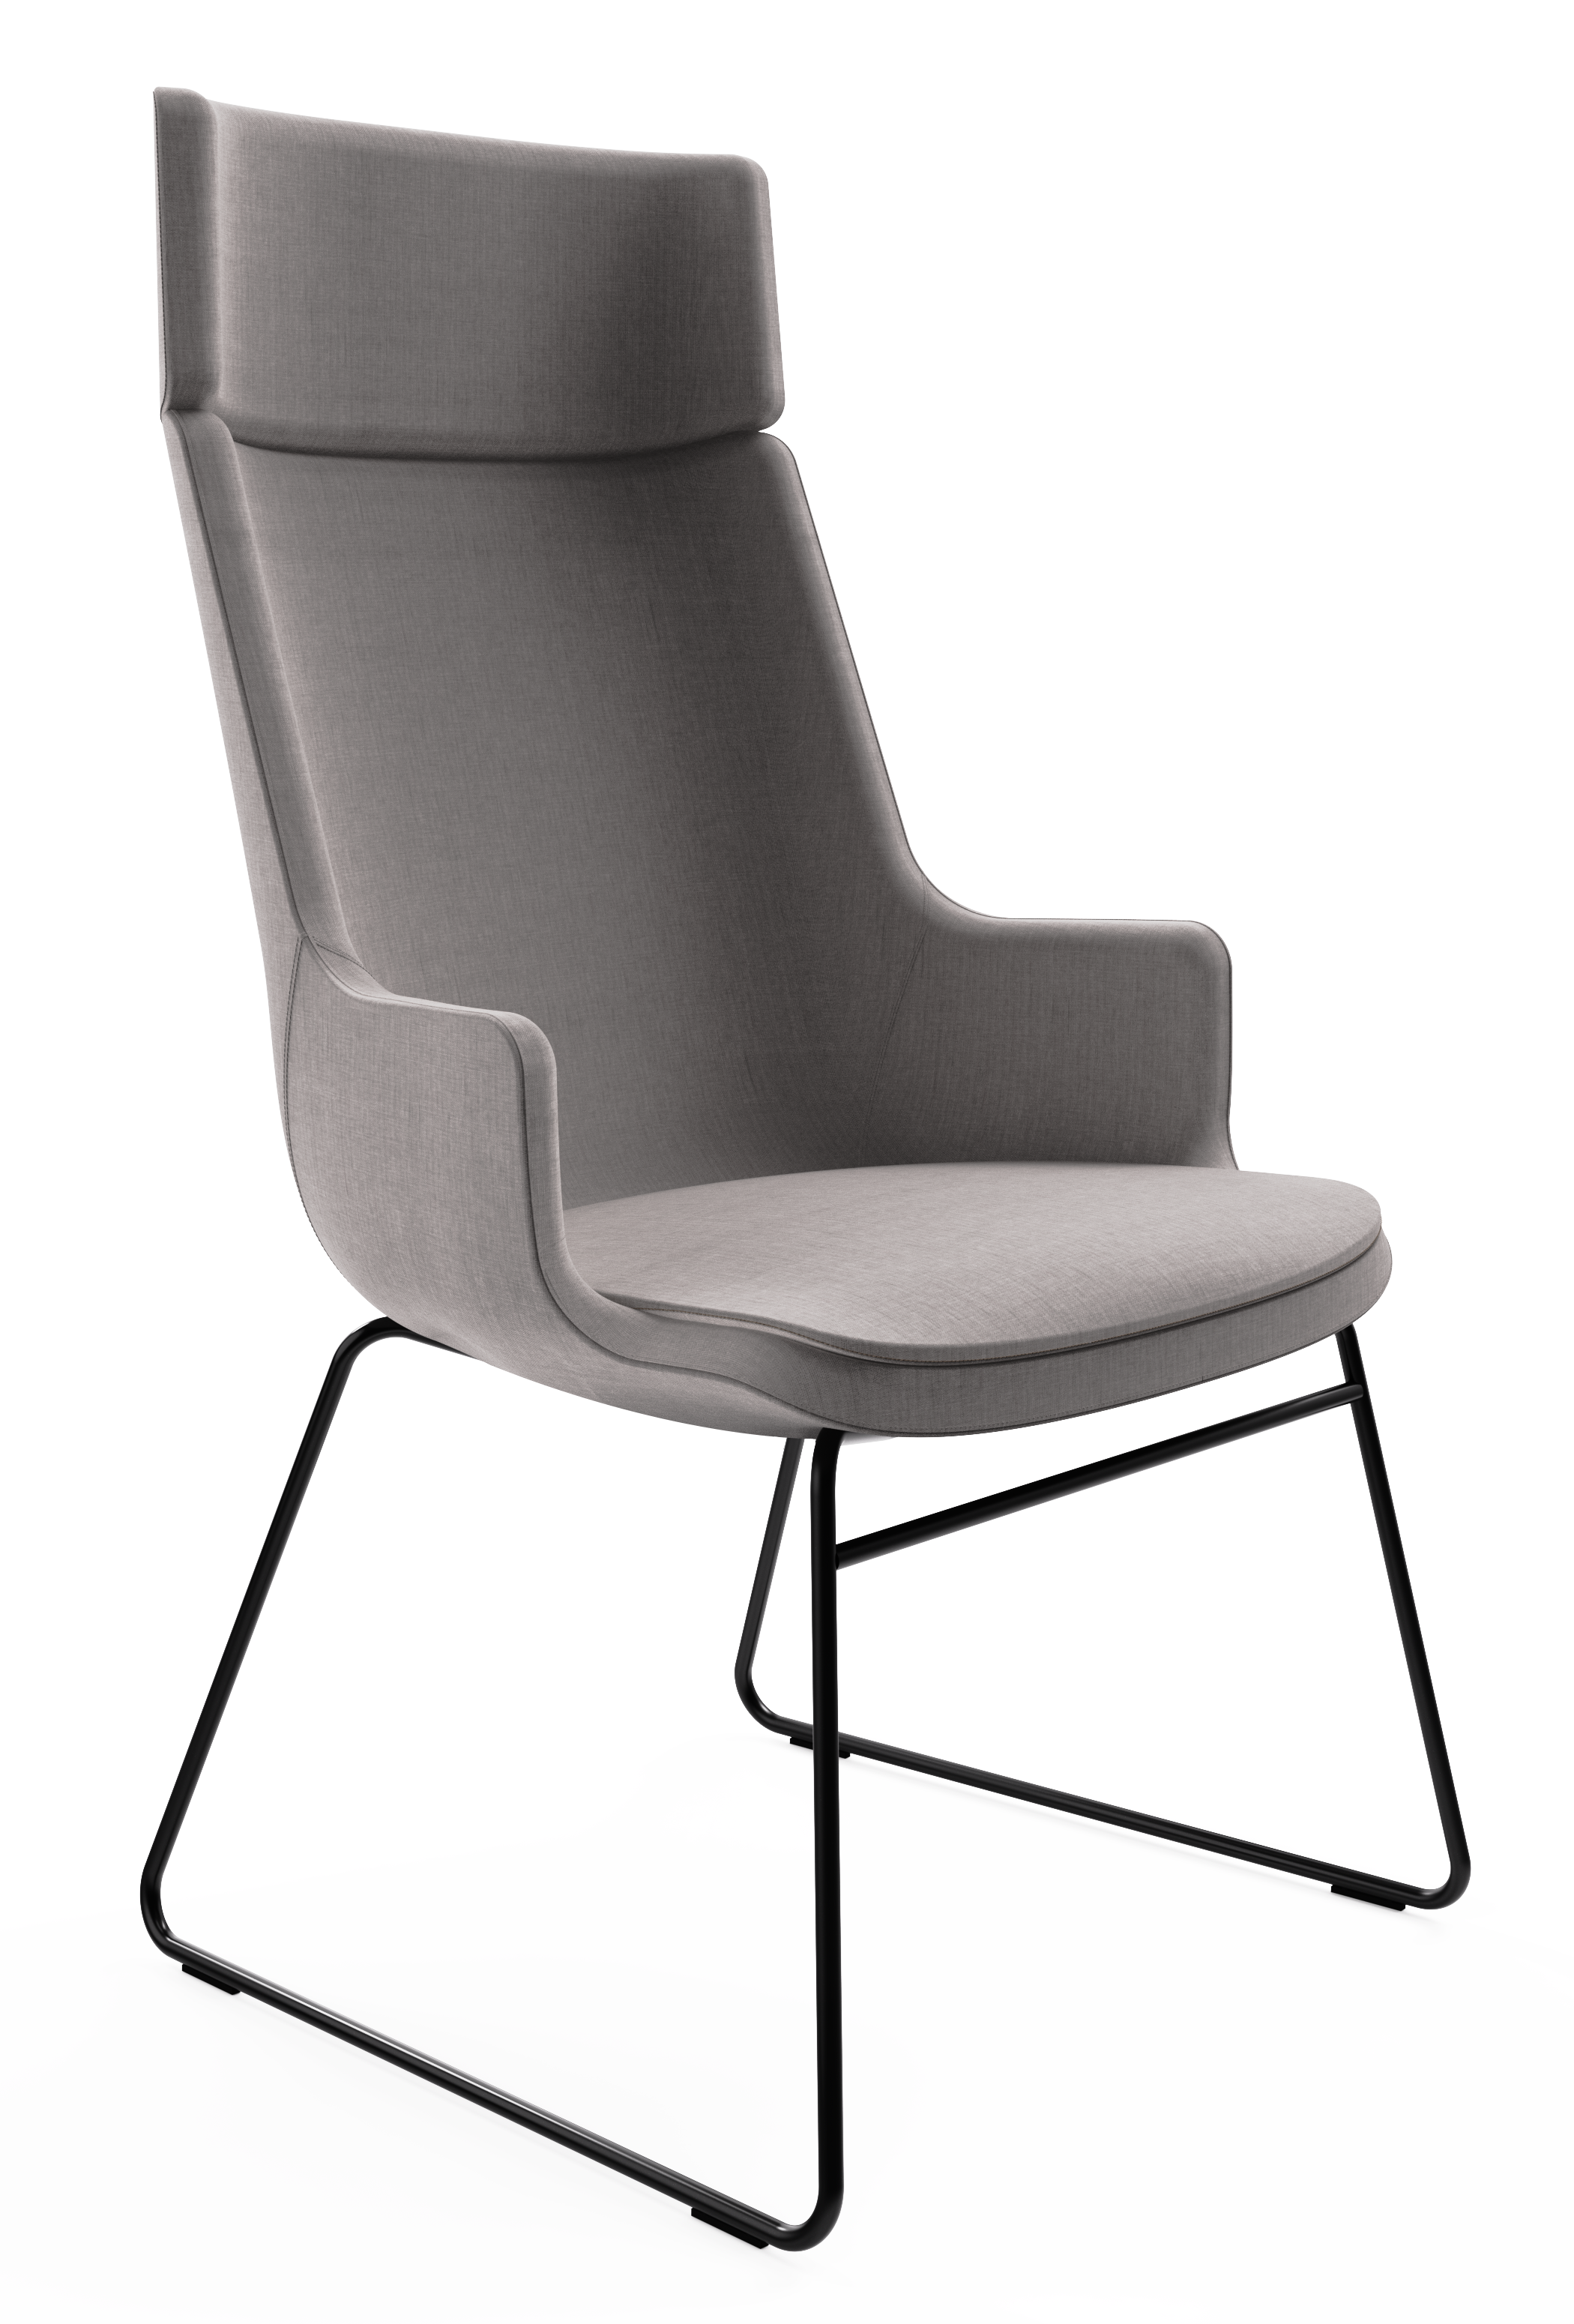 WS - Contour chair - High, Sled black base (Front angle)